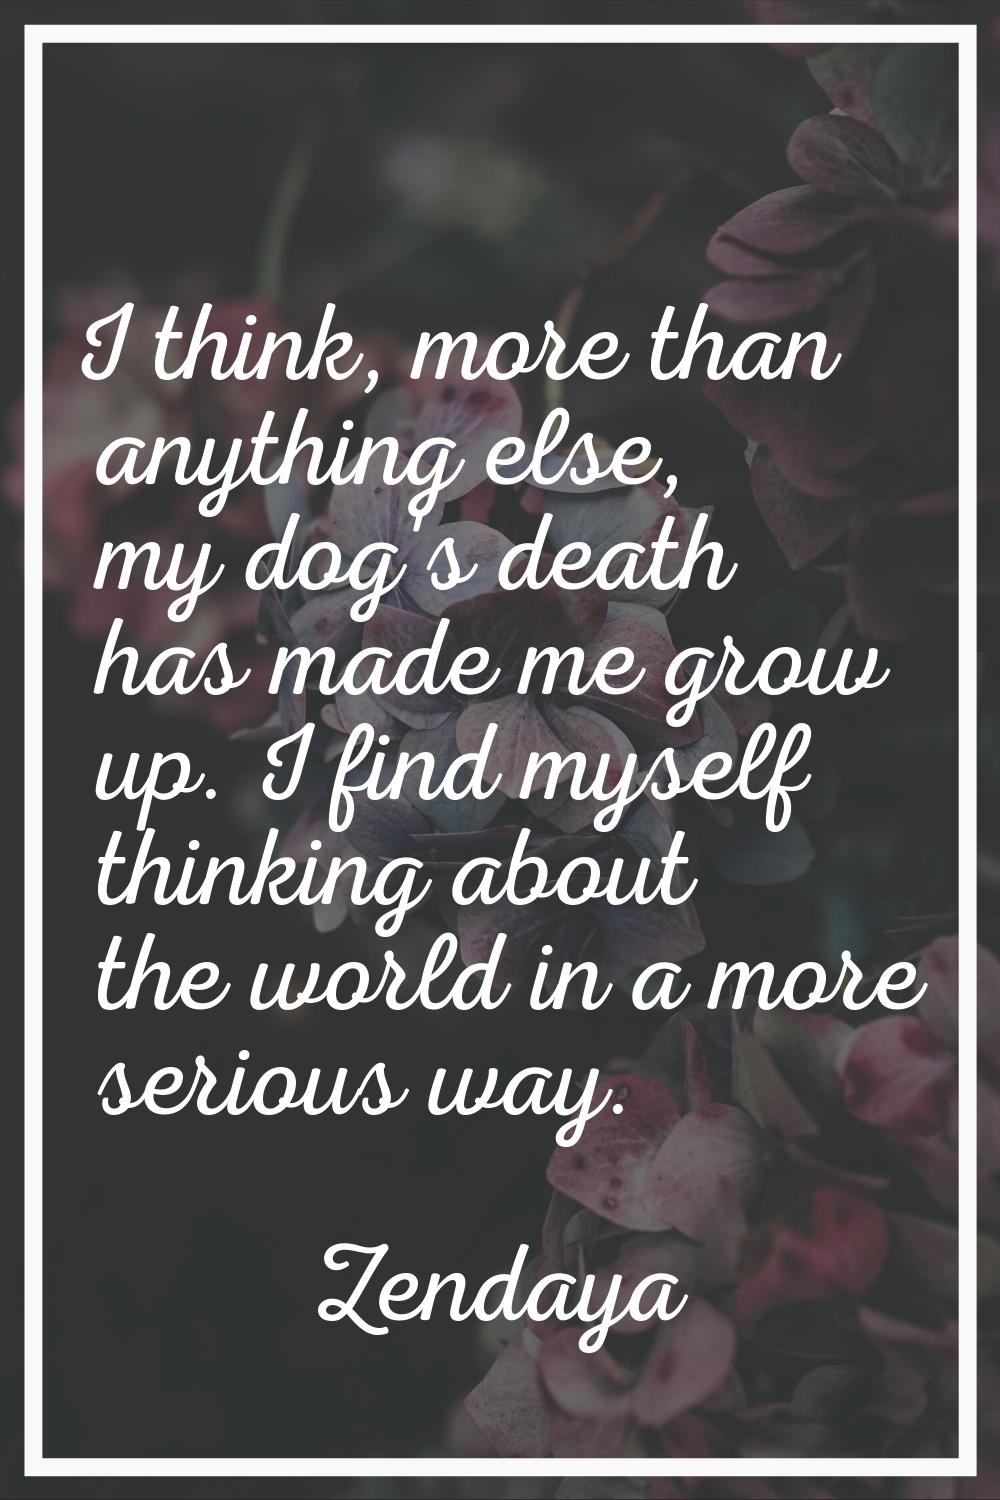 I think, more than anything else, my dog's death has made me grow up. I find myself thinking about 